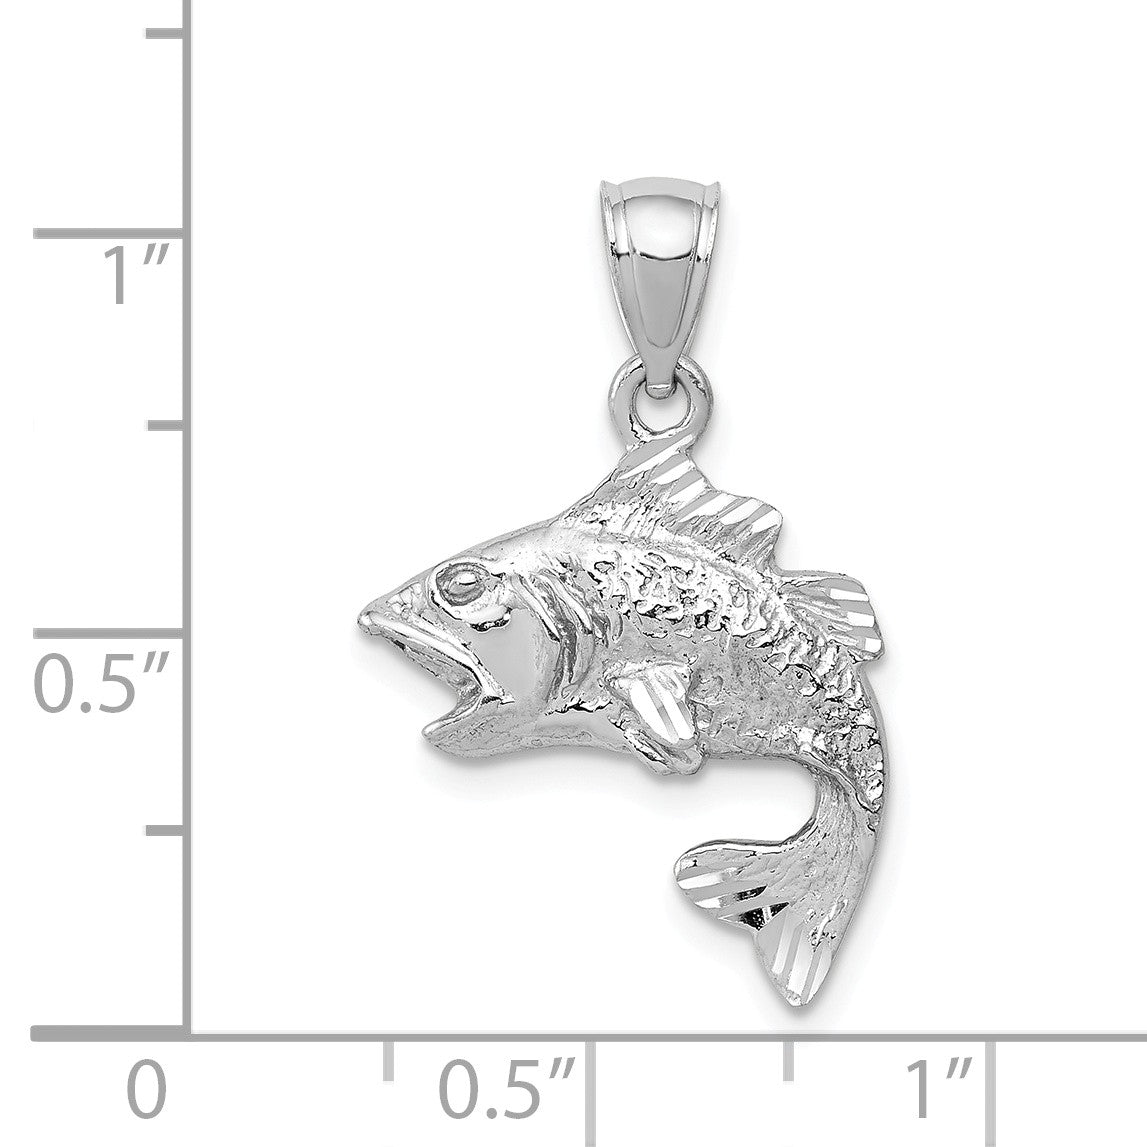 Alternate view of the 14k White Gold Bass Pendant, 17mm (5/8 inch) by The Black Bow Jewelry Co.